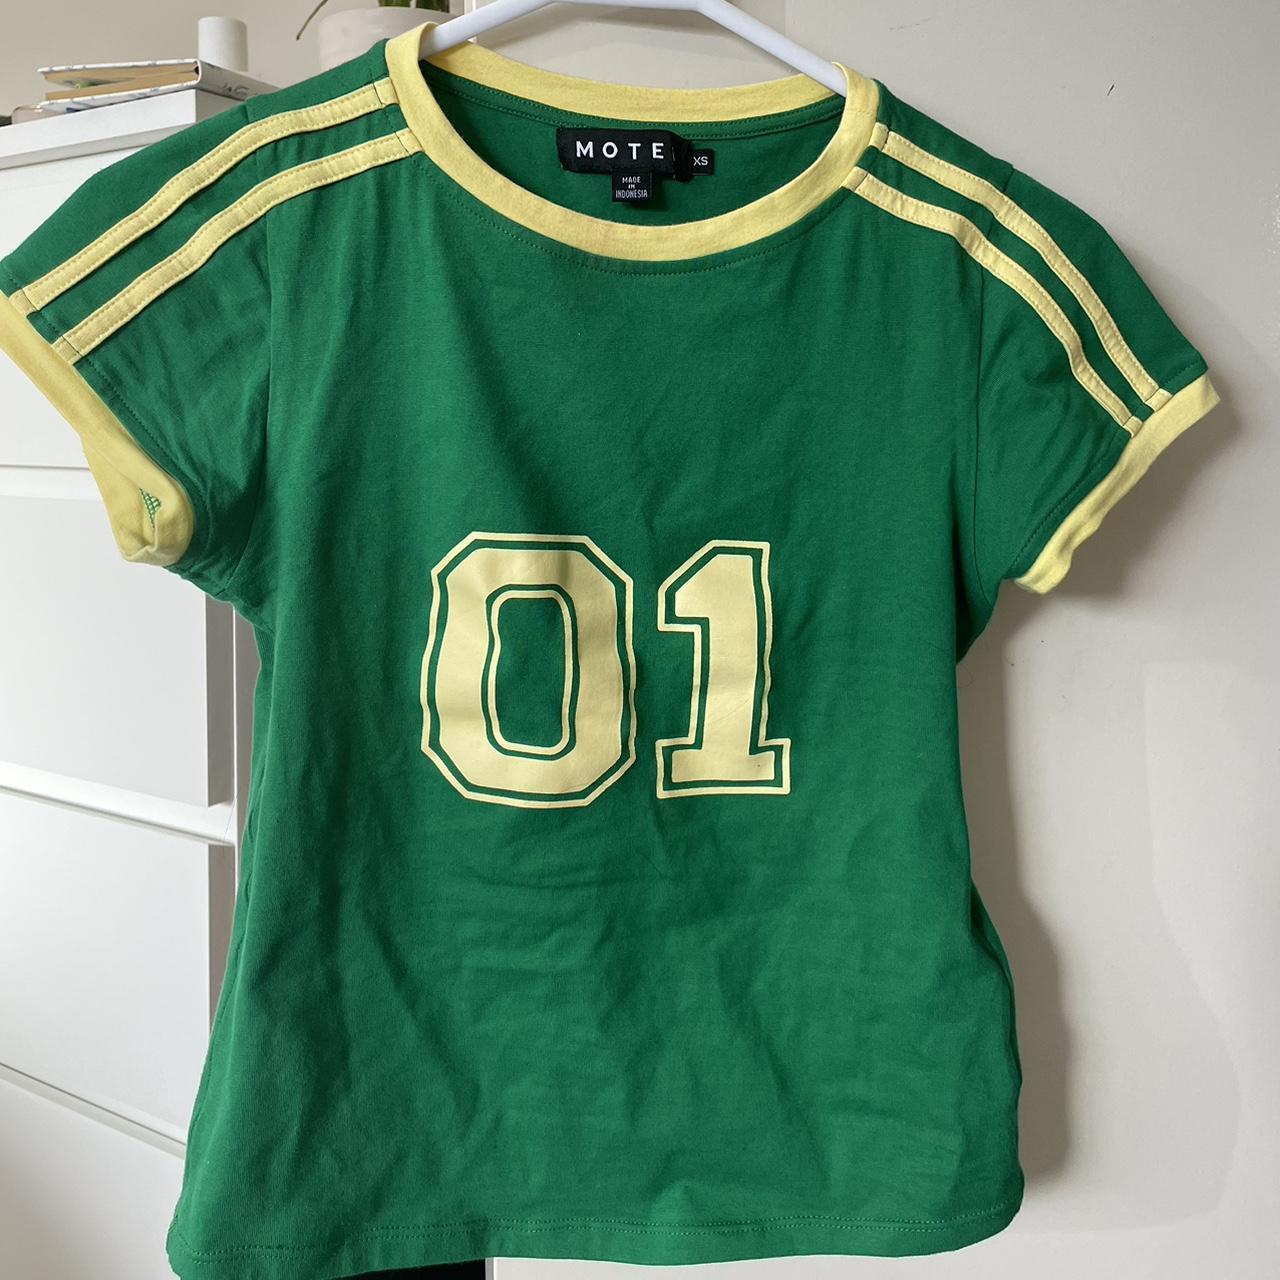 green motel baby tee super cute only worn once size xs - Depop